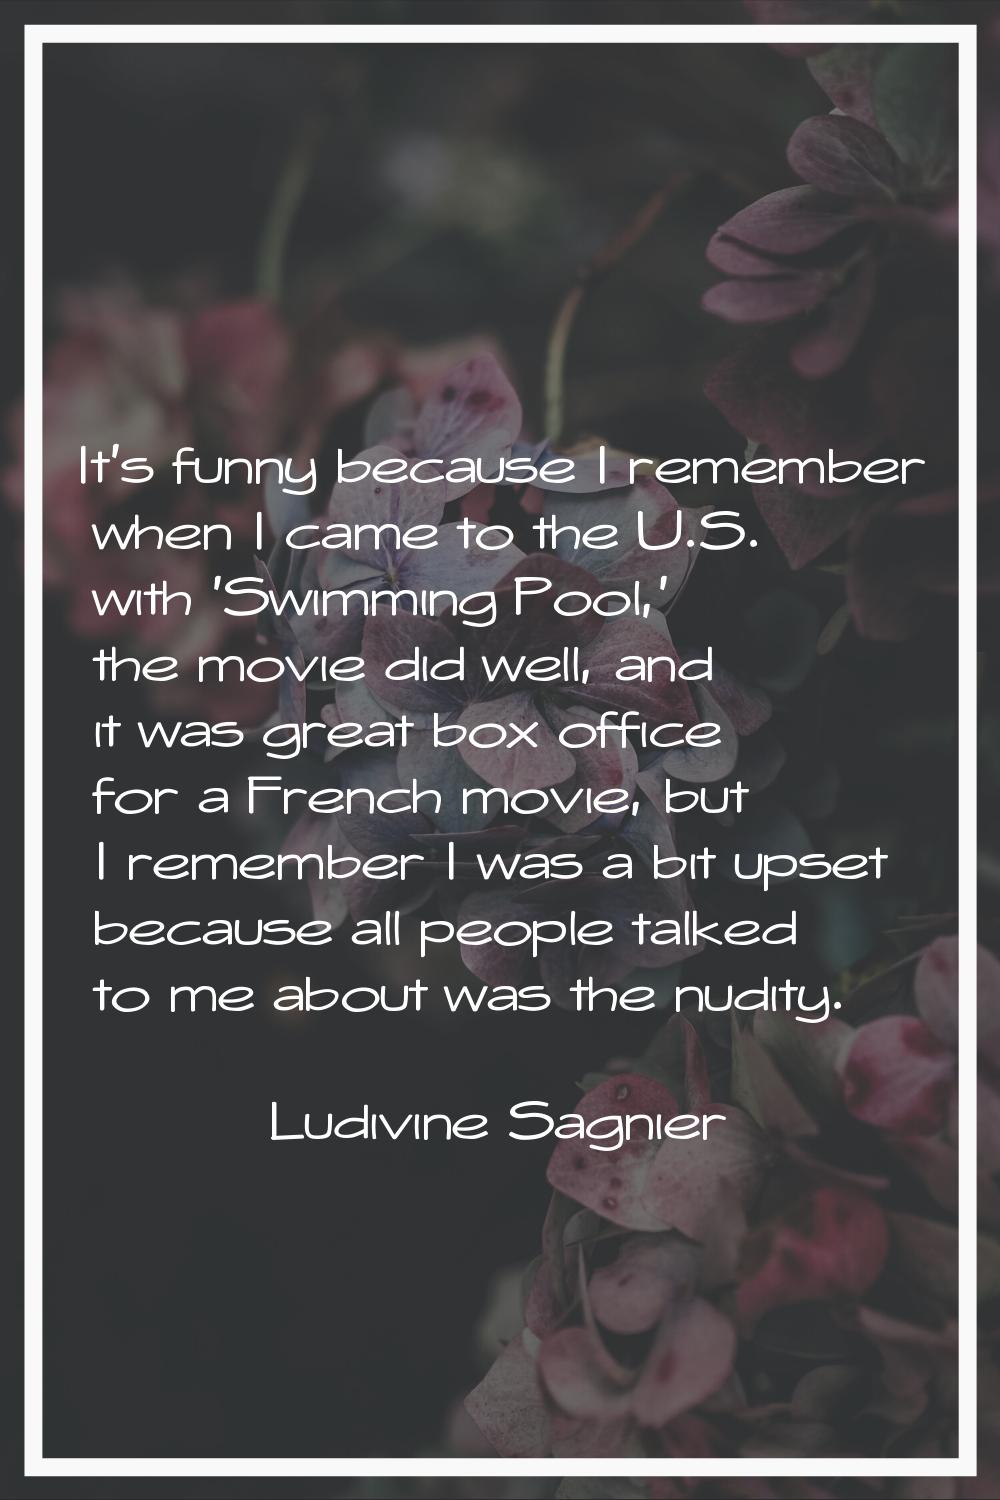 It's funny because I remember when I came to the U.S. with 'Swimming Pool,' the movie did well, and